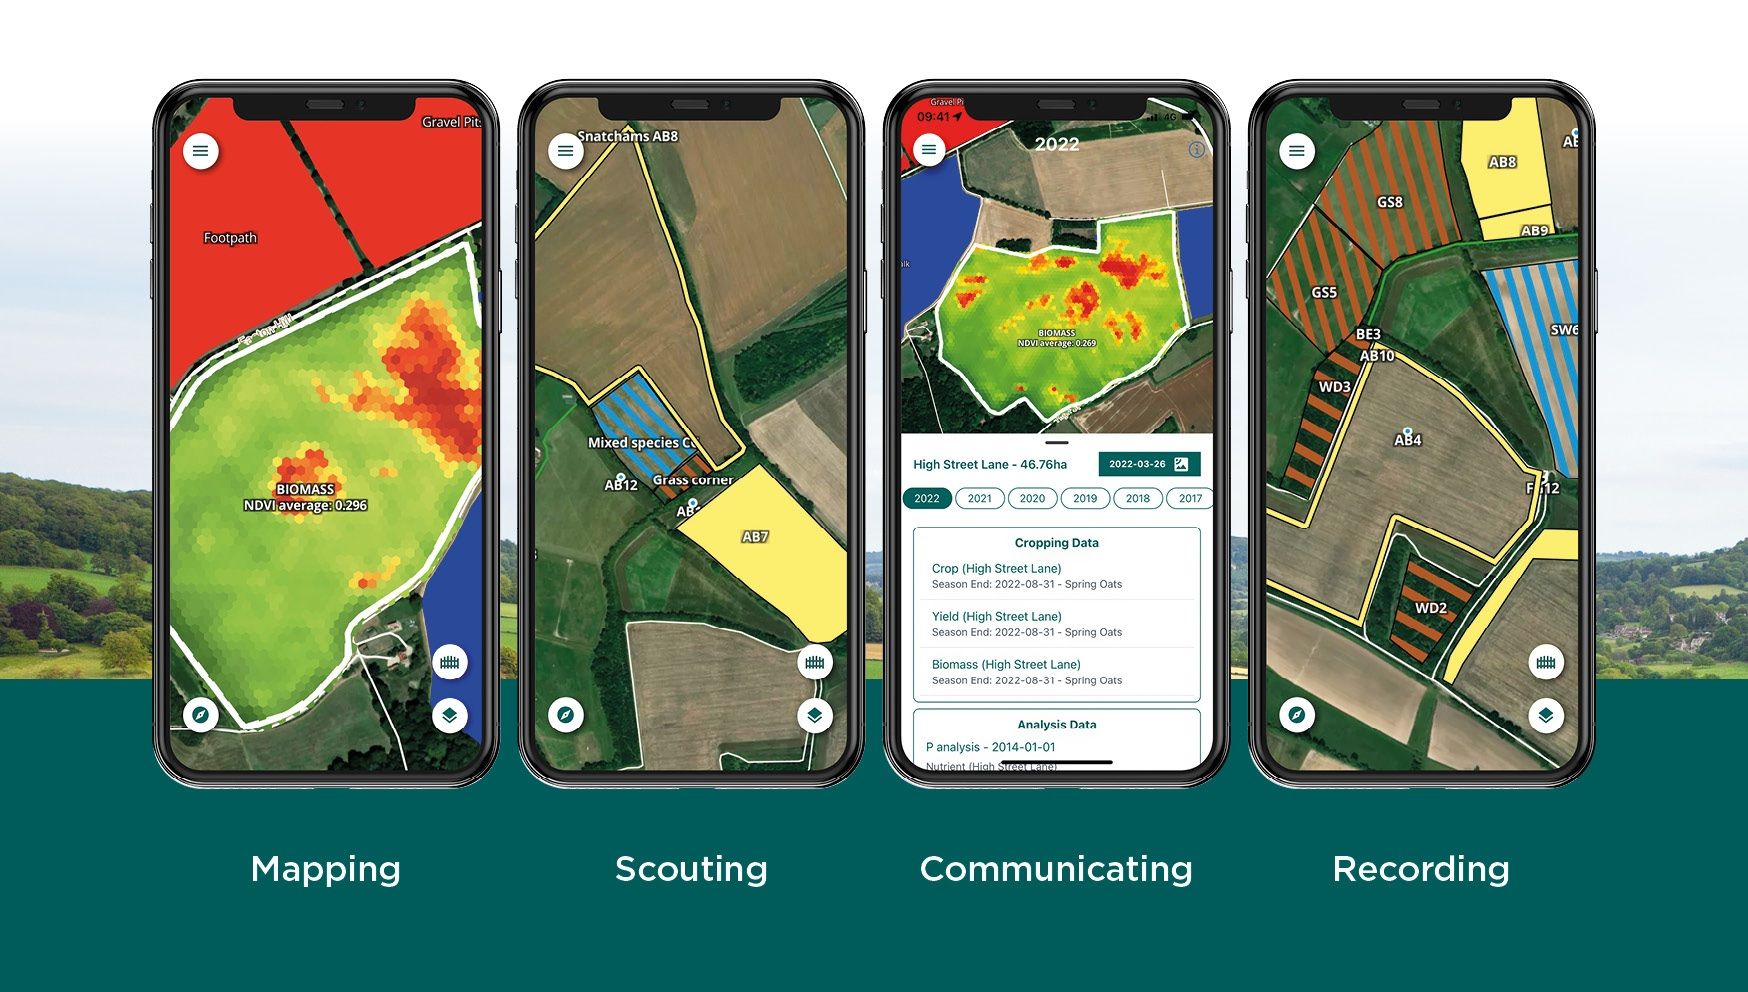 LAMMA 2022: Frontier to introduce new app and support for sustainable farming practices